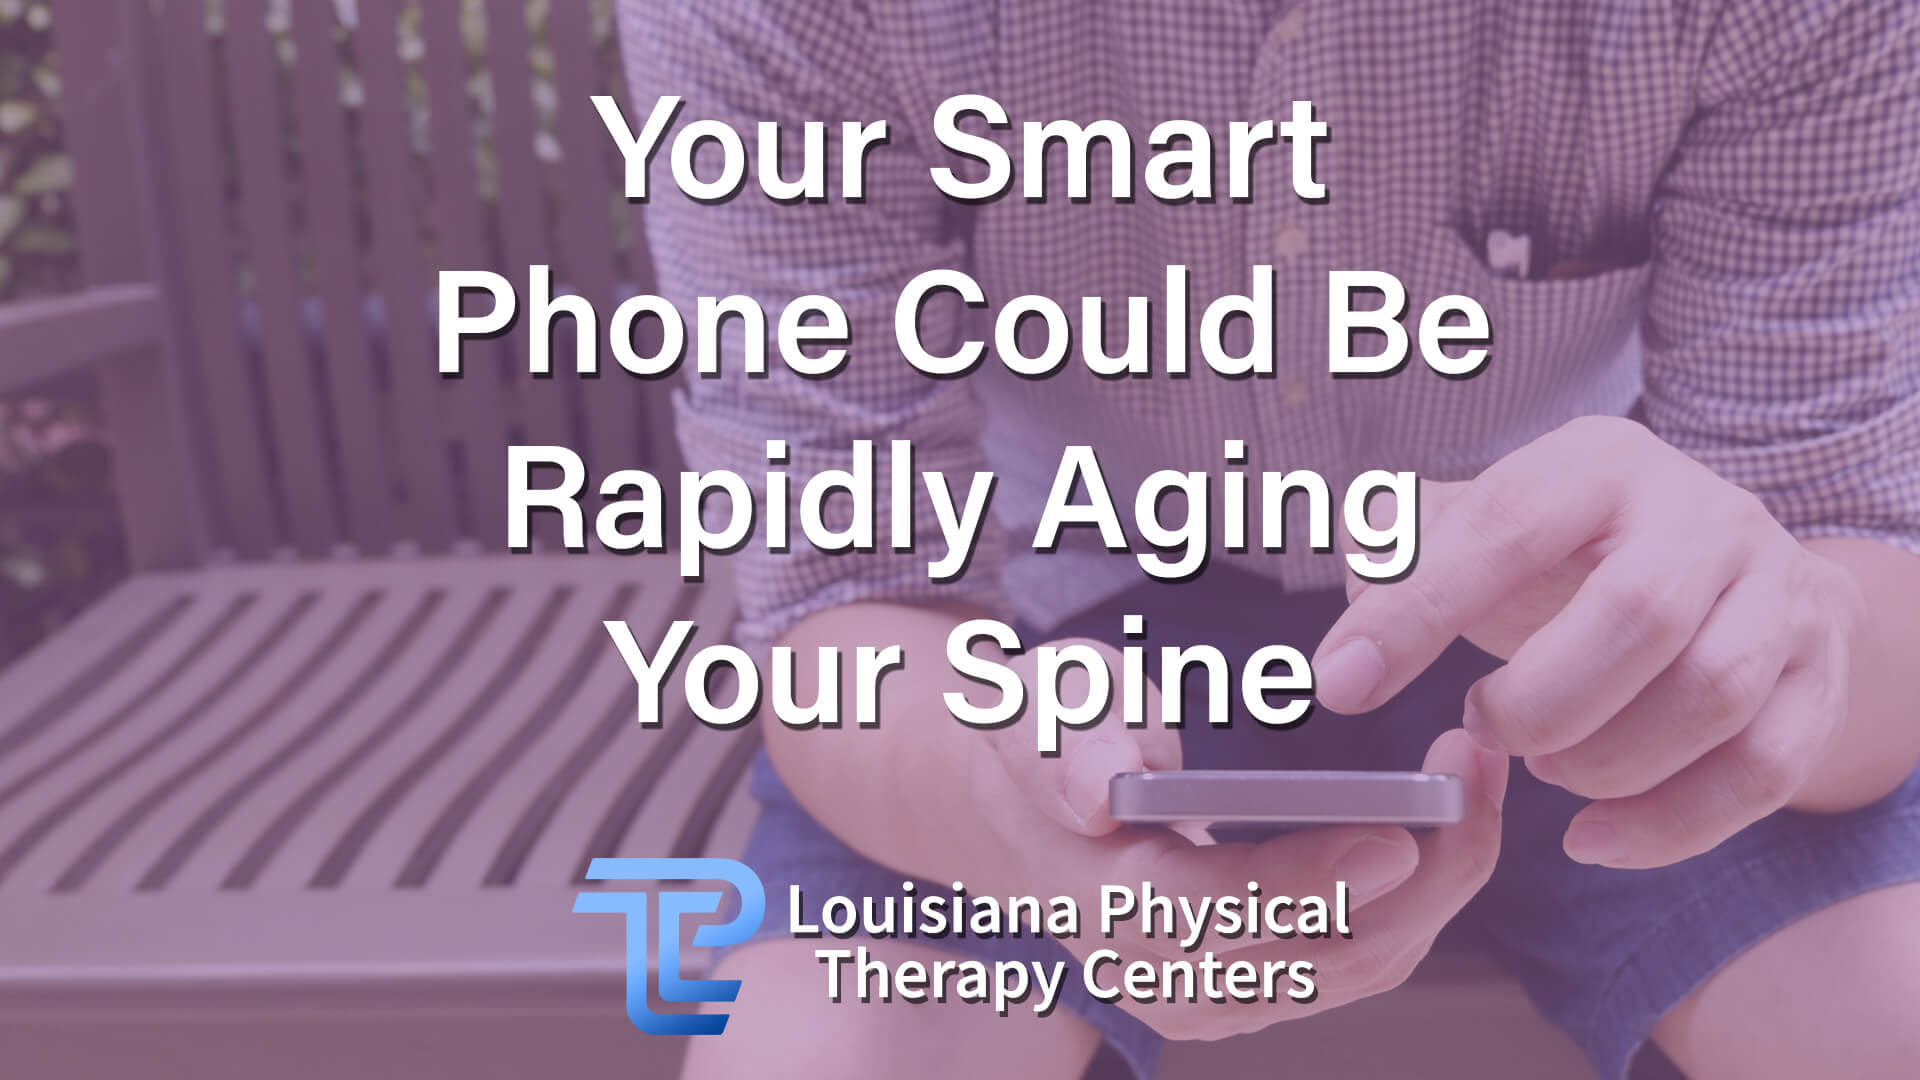 Your Smart Phone Could Be Rapidly Aging Your Spine